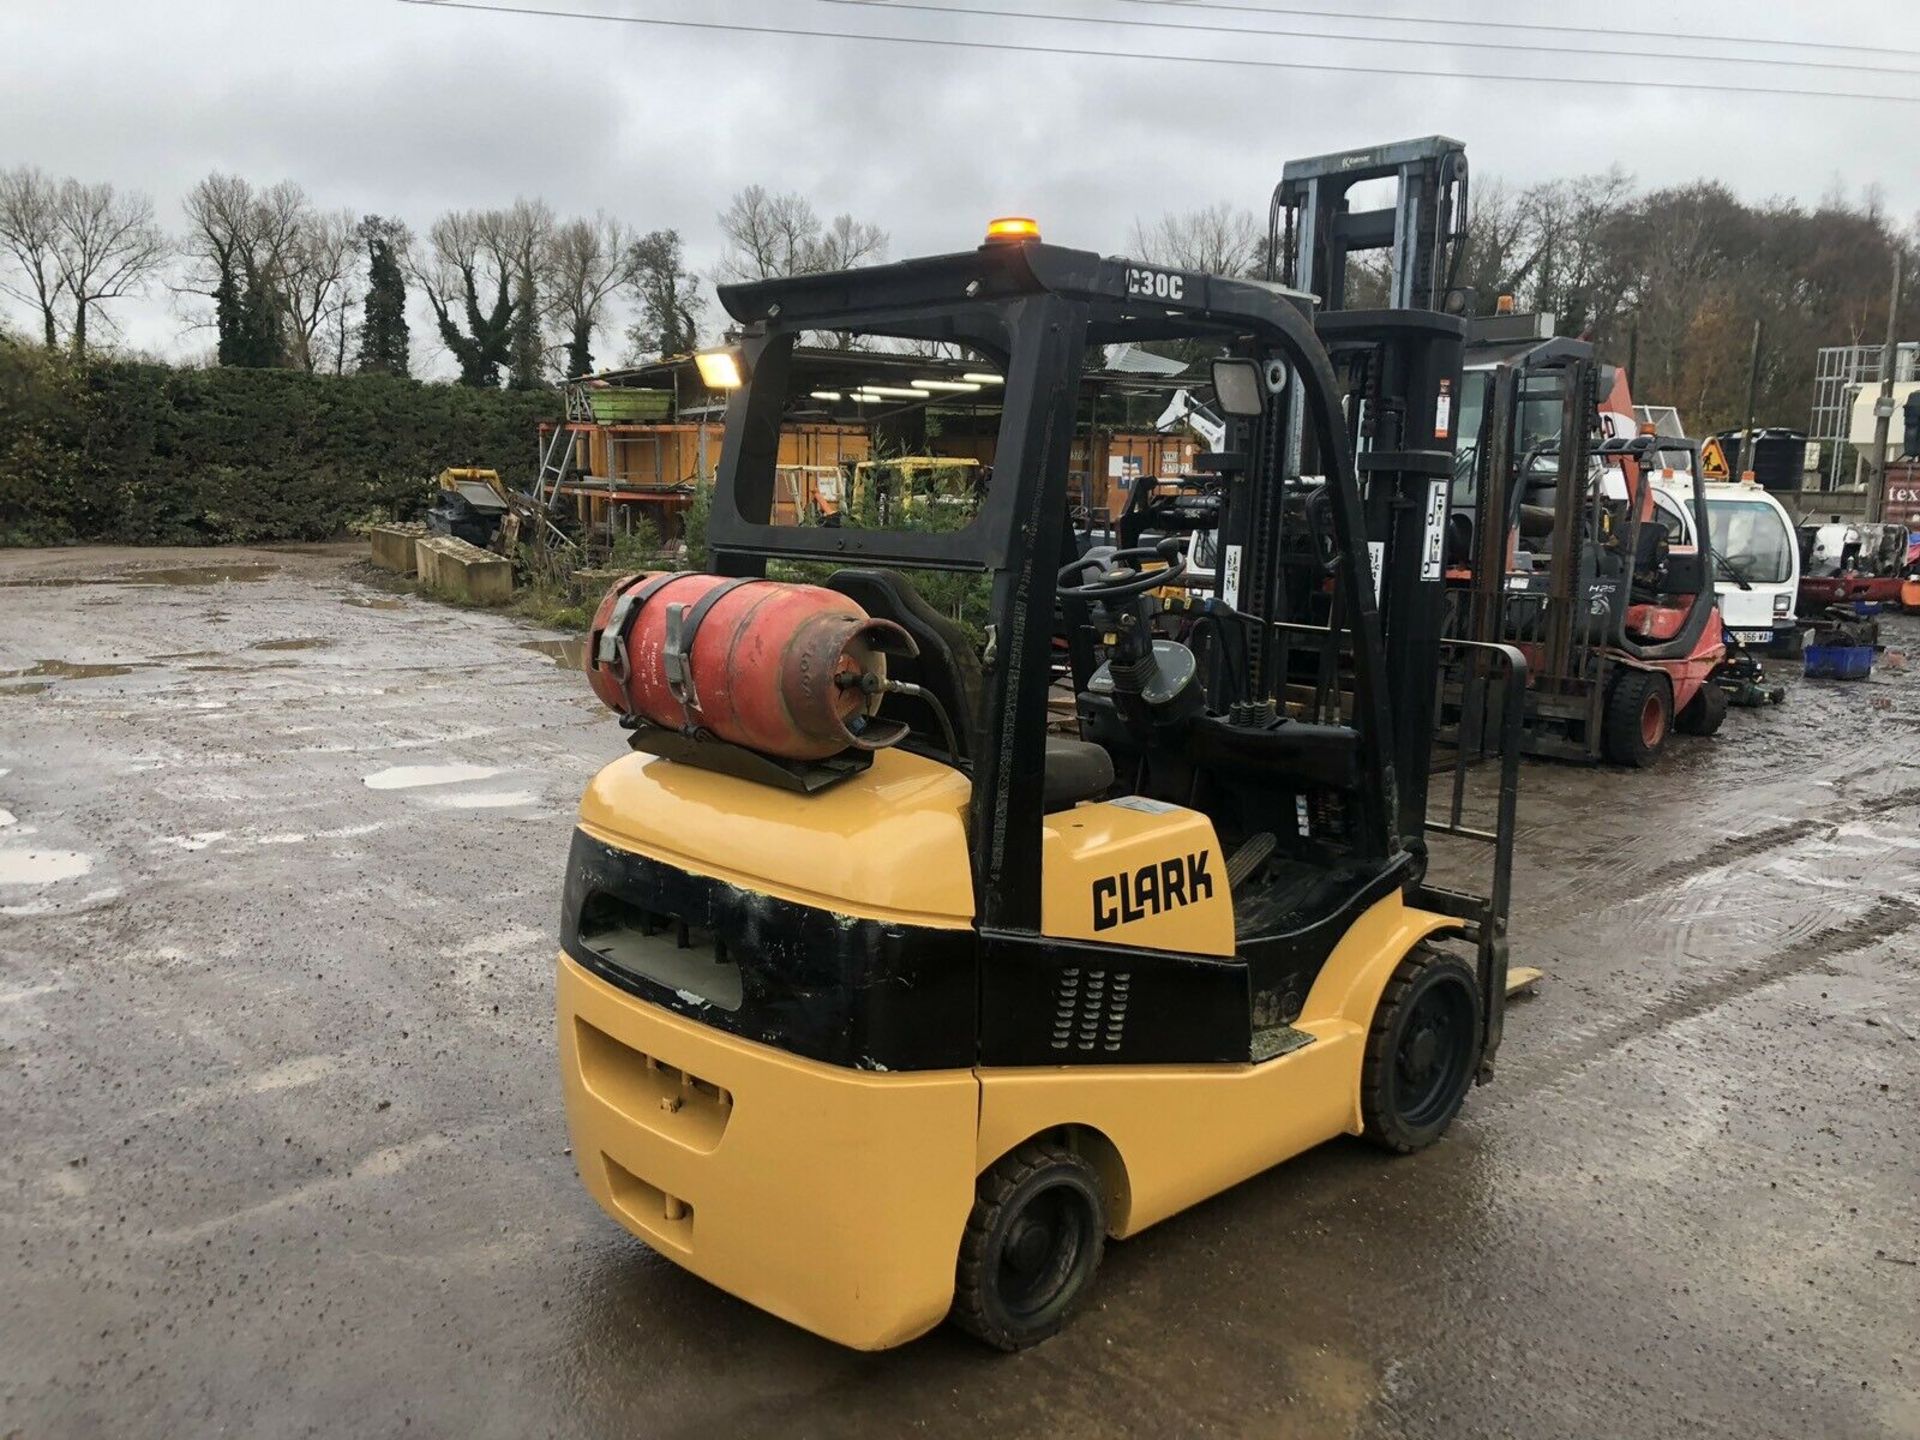 2003 CLARK C30, 3 TON GAS FORKLIFT, RUNS AND OPERATES AS IT SHOULD *PLUS VAT* - Image 2 of 5